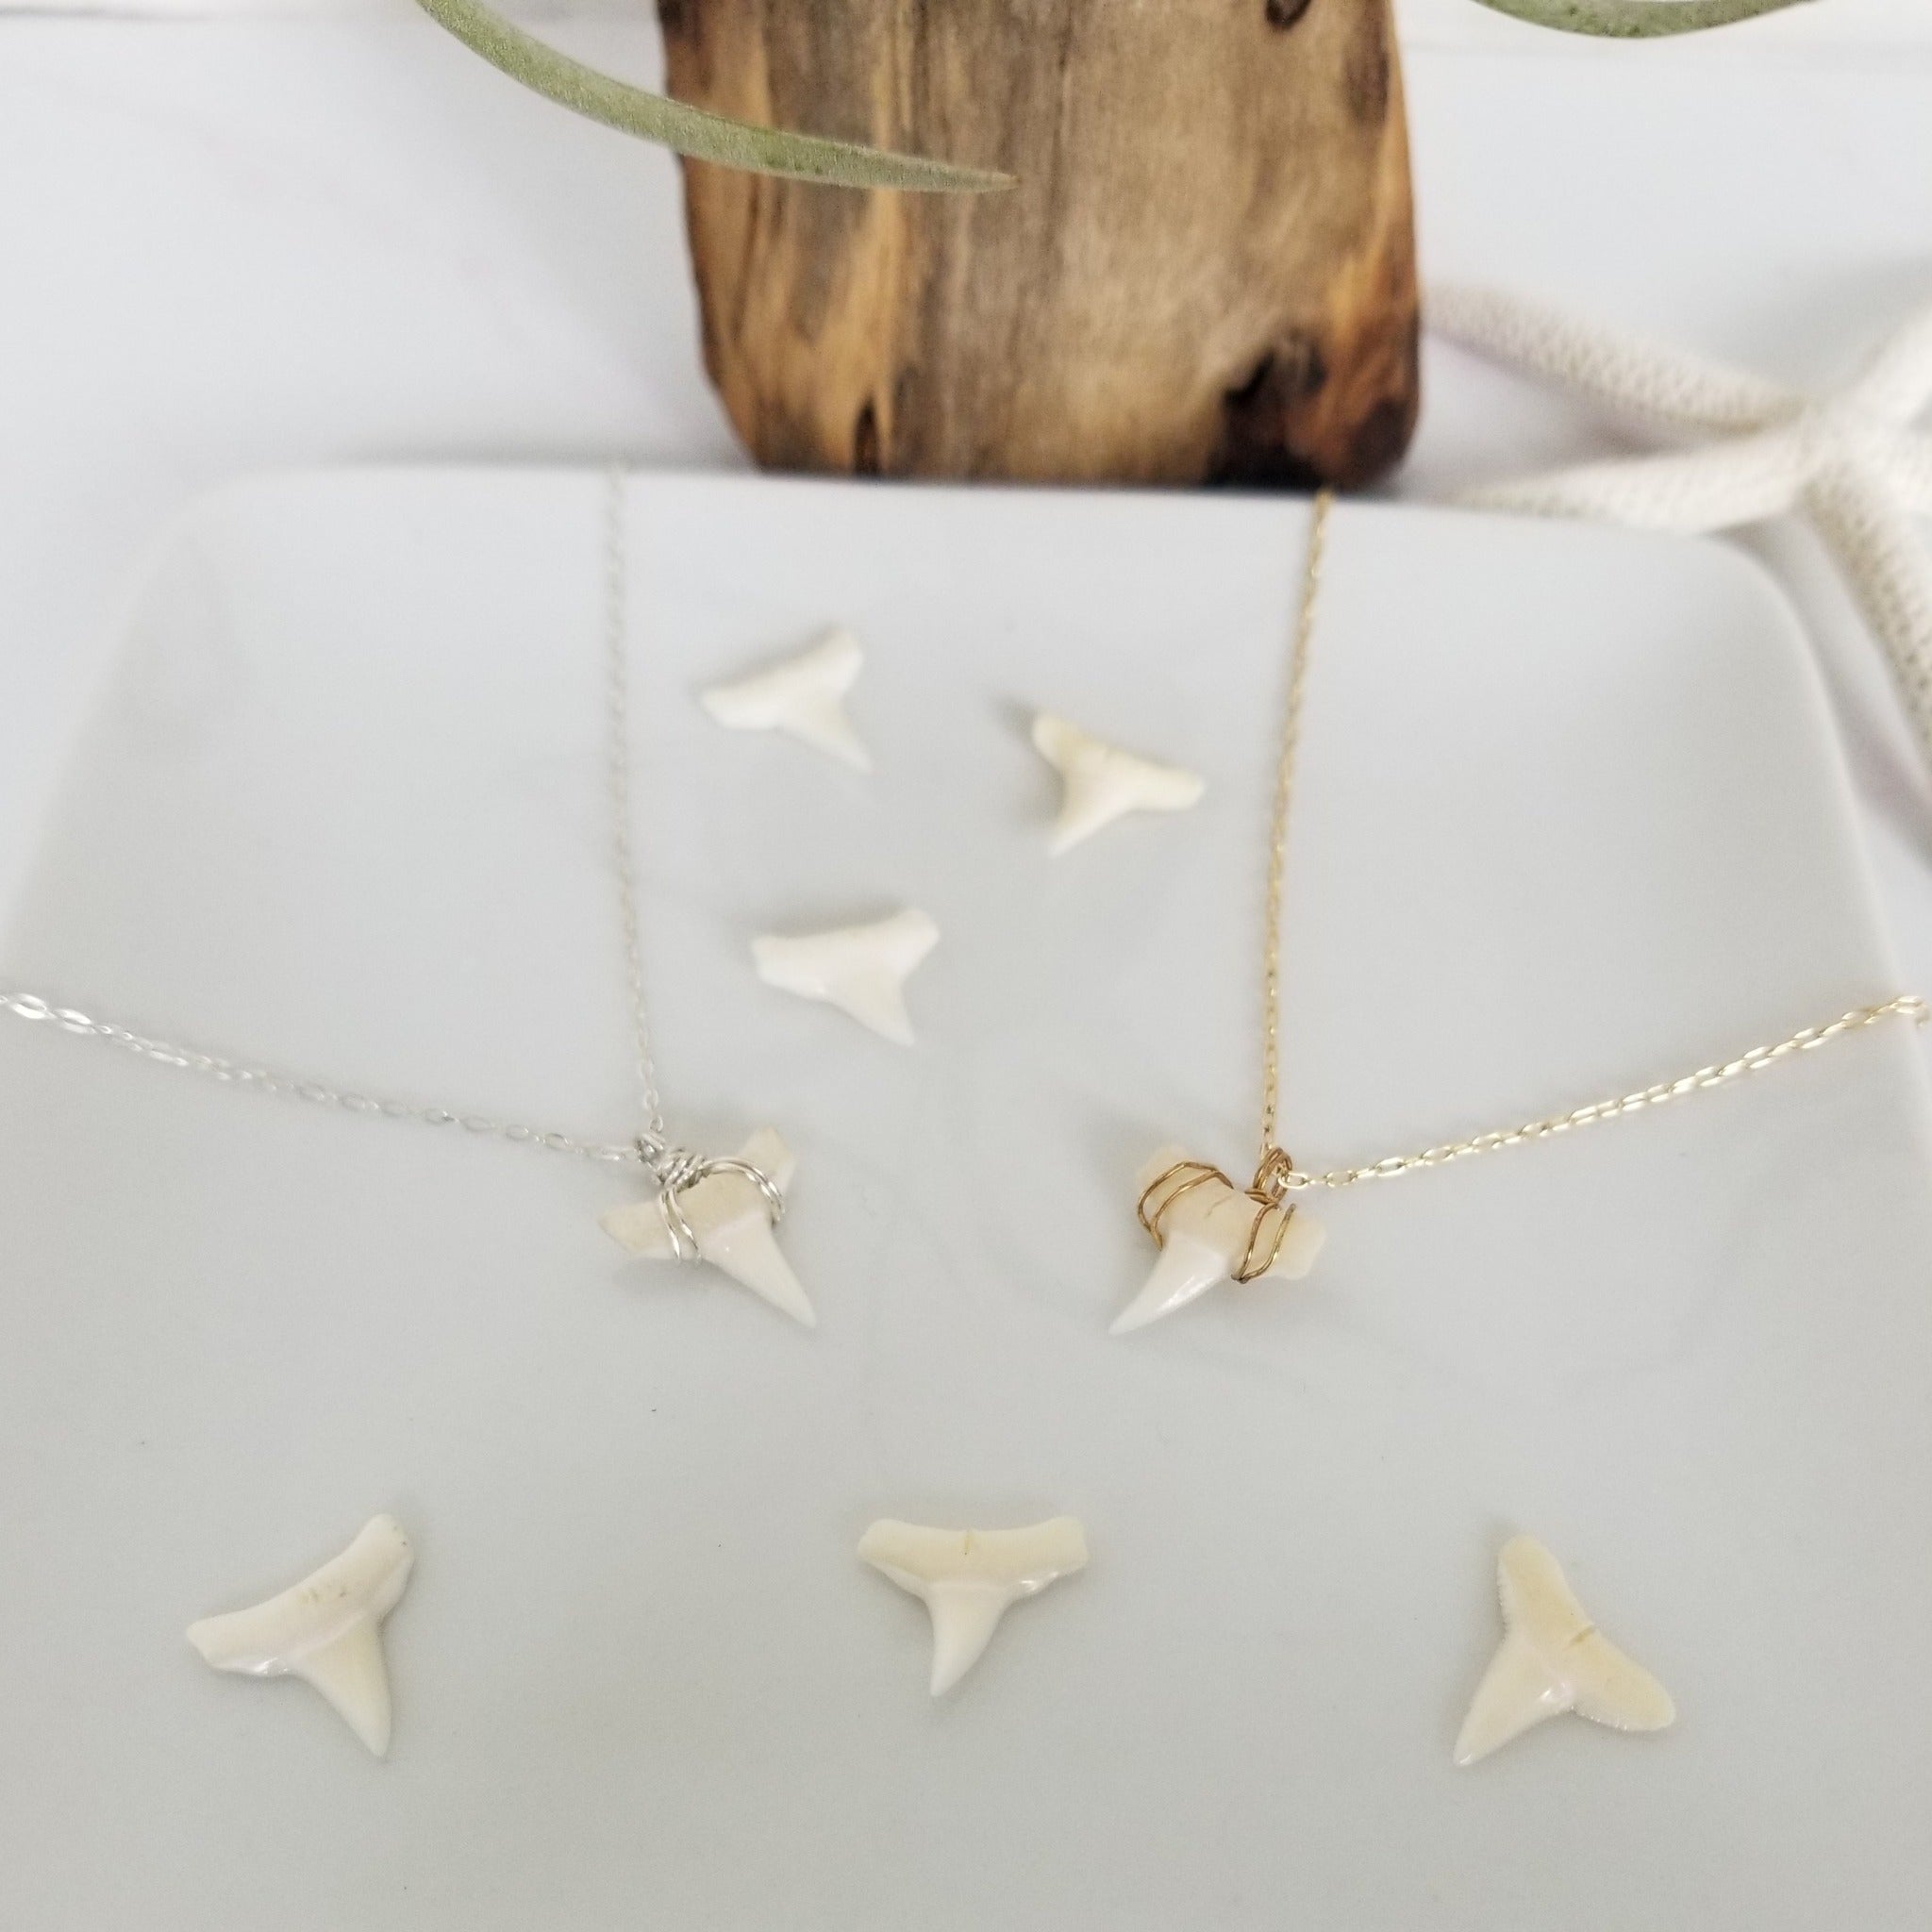 The "Annesa" - Real Shark Tooth Layering Necklace - Sterling or Gold